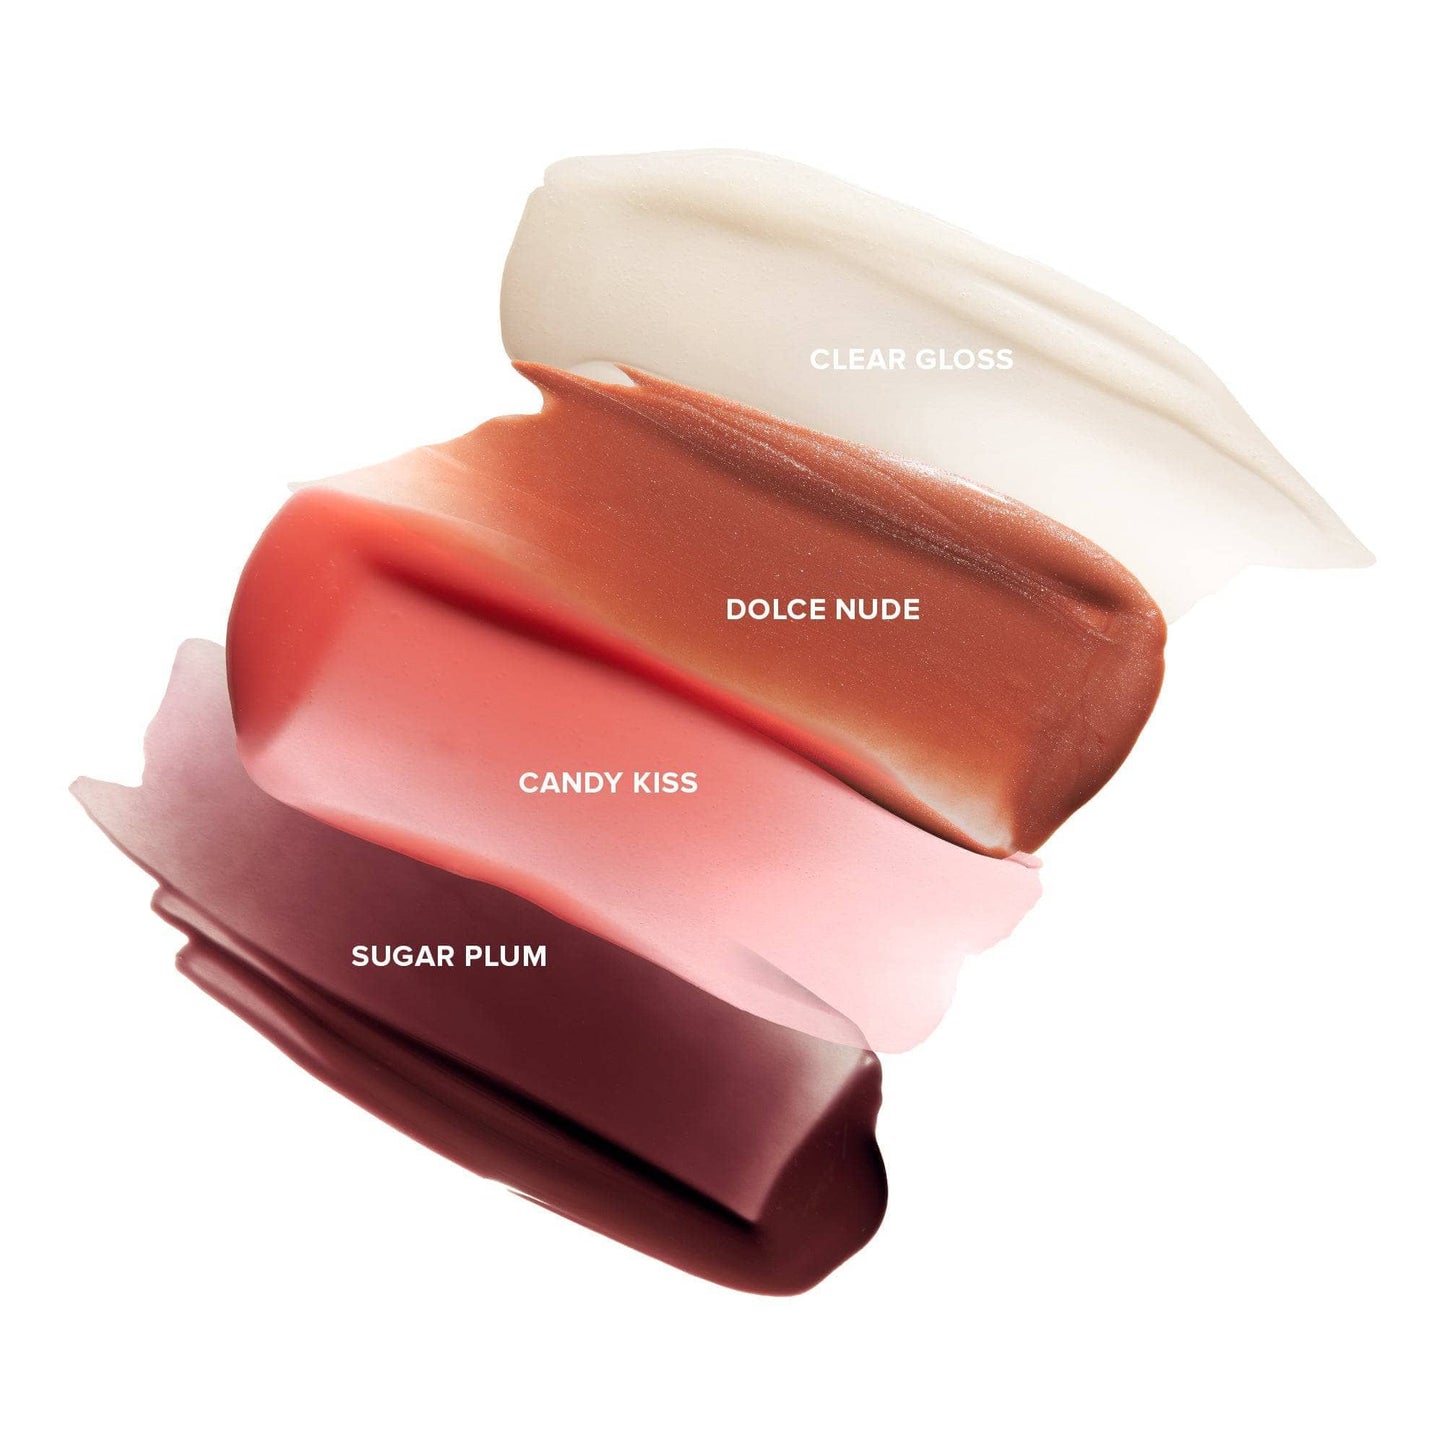 Hydra-Peptide Lip Butter Candy Kiss texture swatch